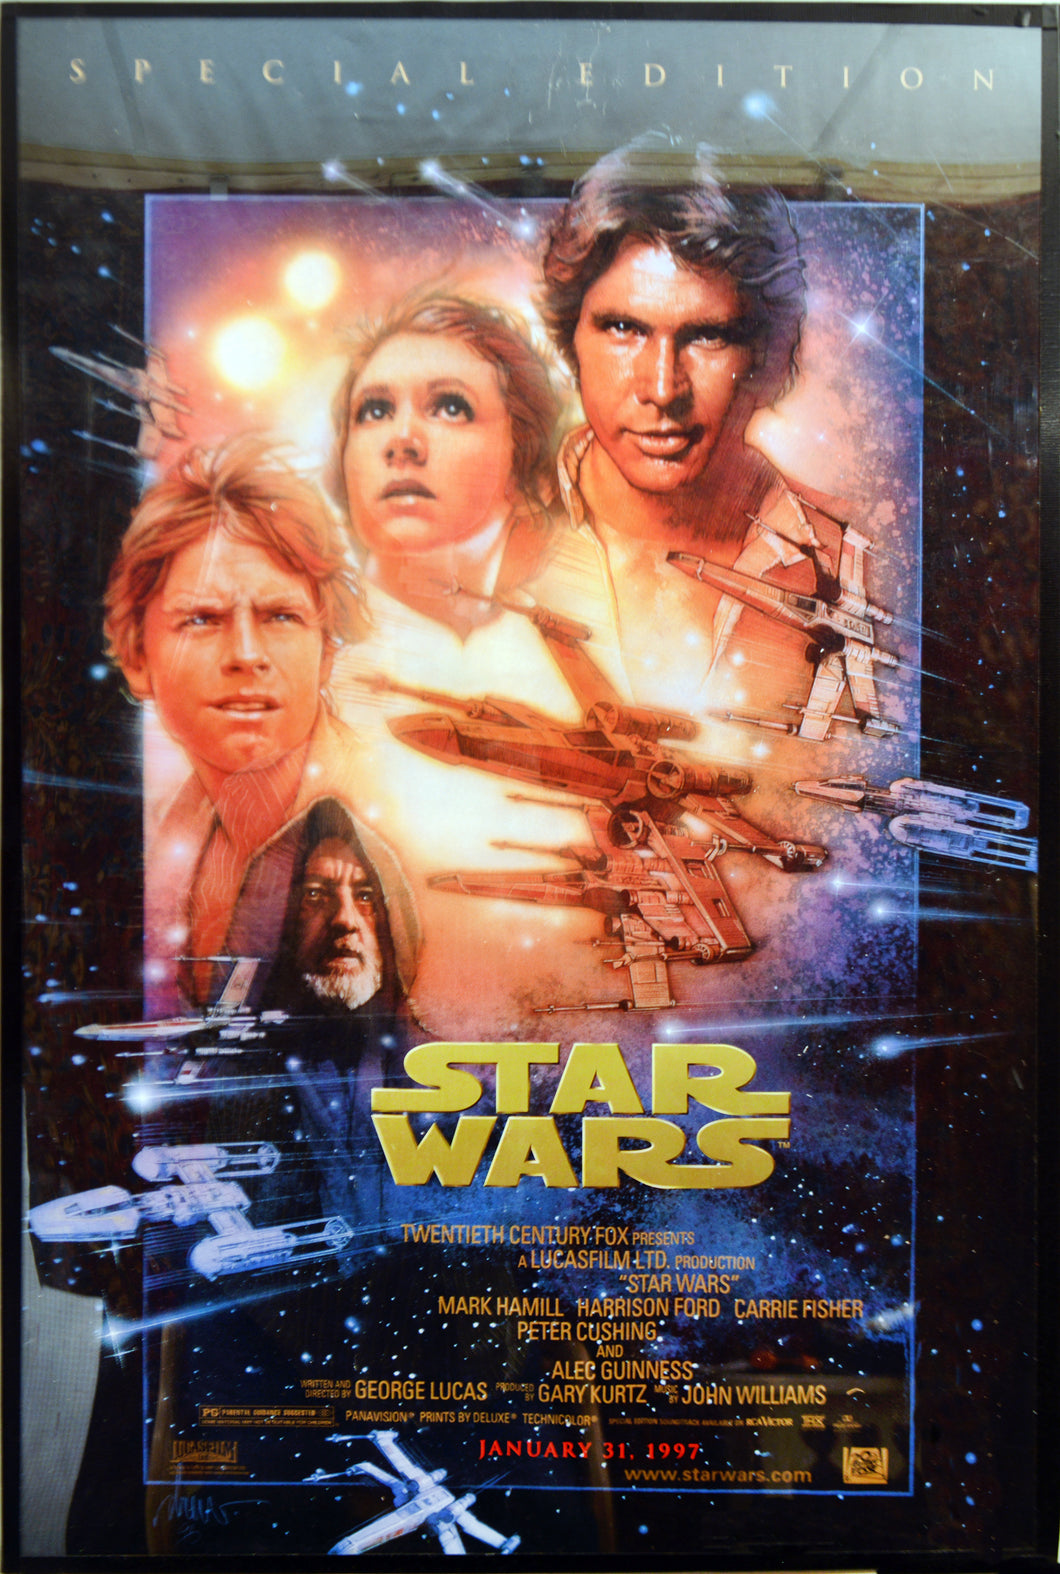 Star Wars EP IV Special Edition Poster